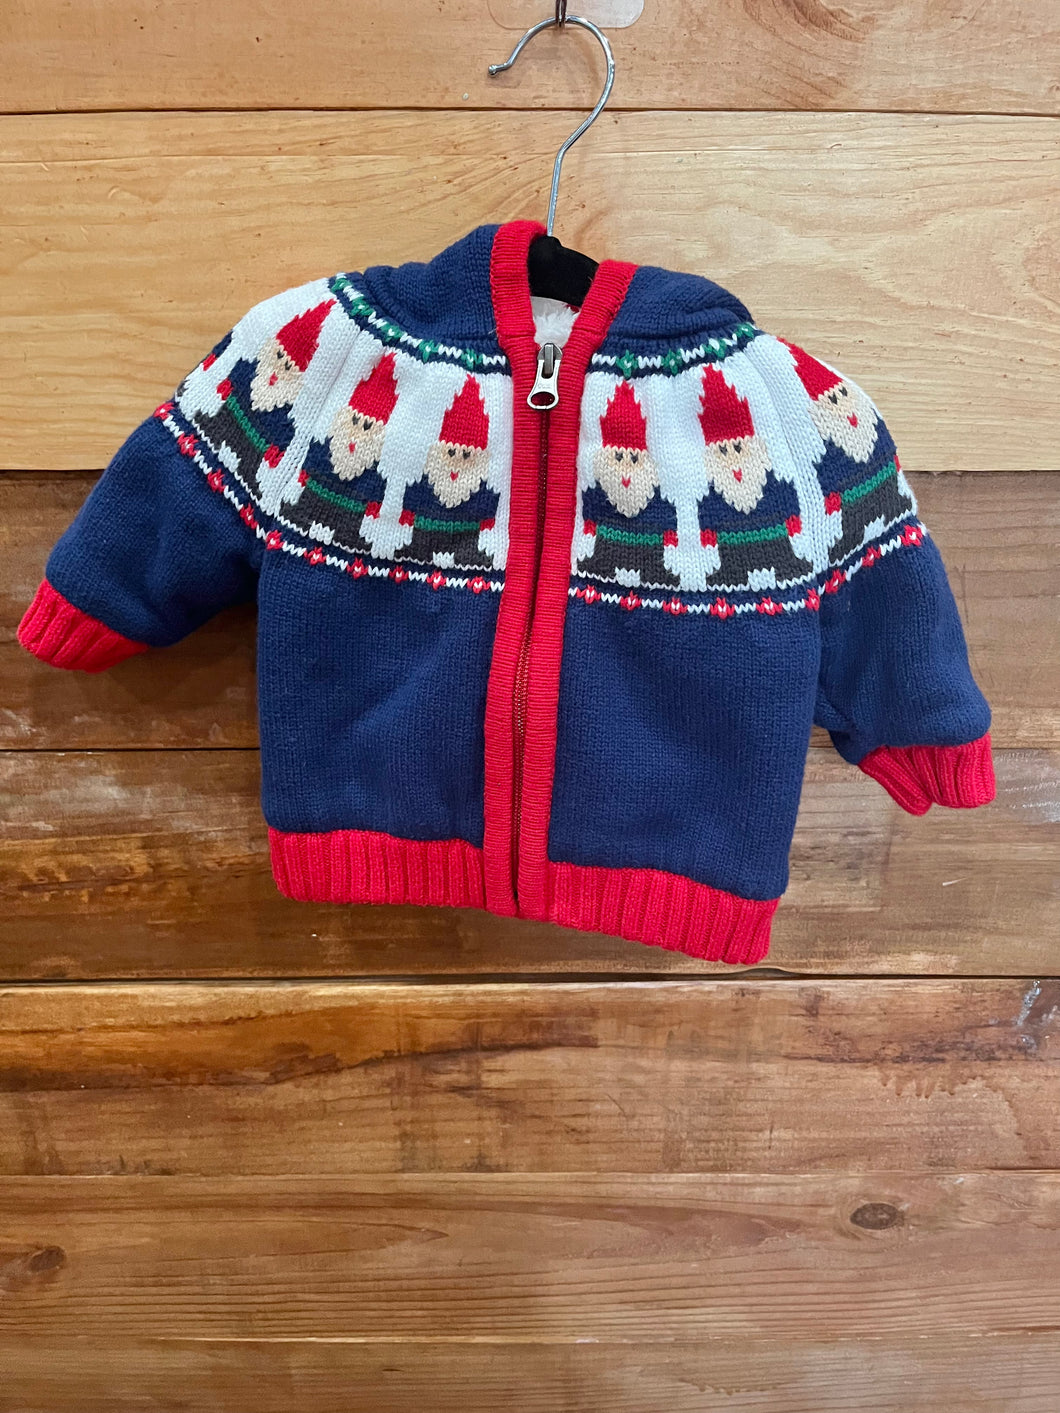 Hanna Andersson Gnome Sherpa Jacket Size 0-3m